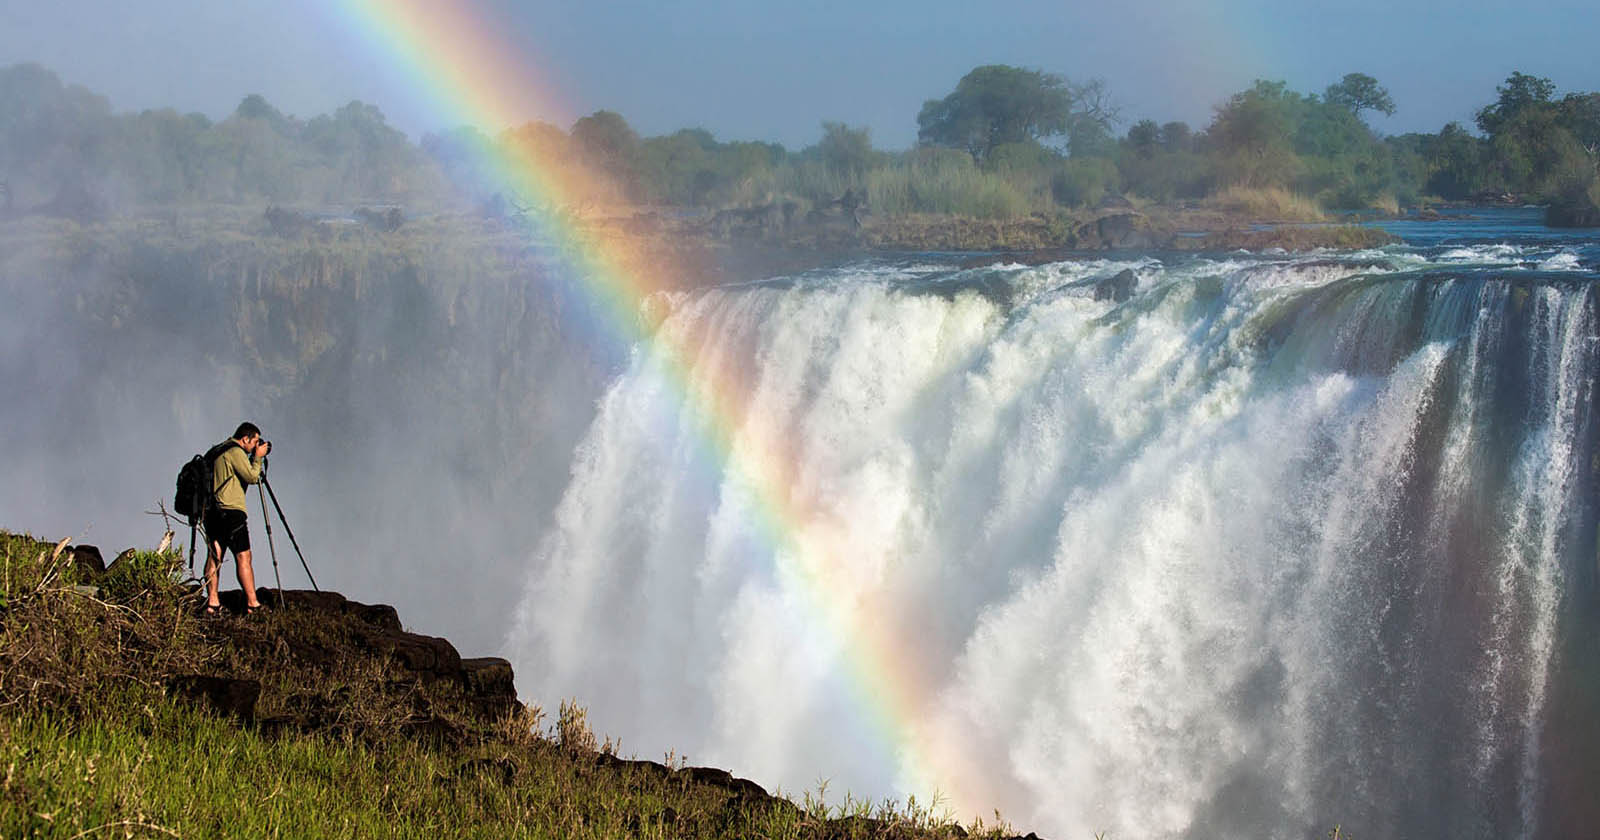 The Landscape Photographer’s Guide to Victoria Falls